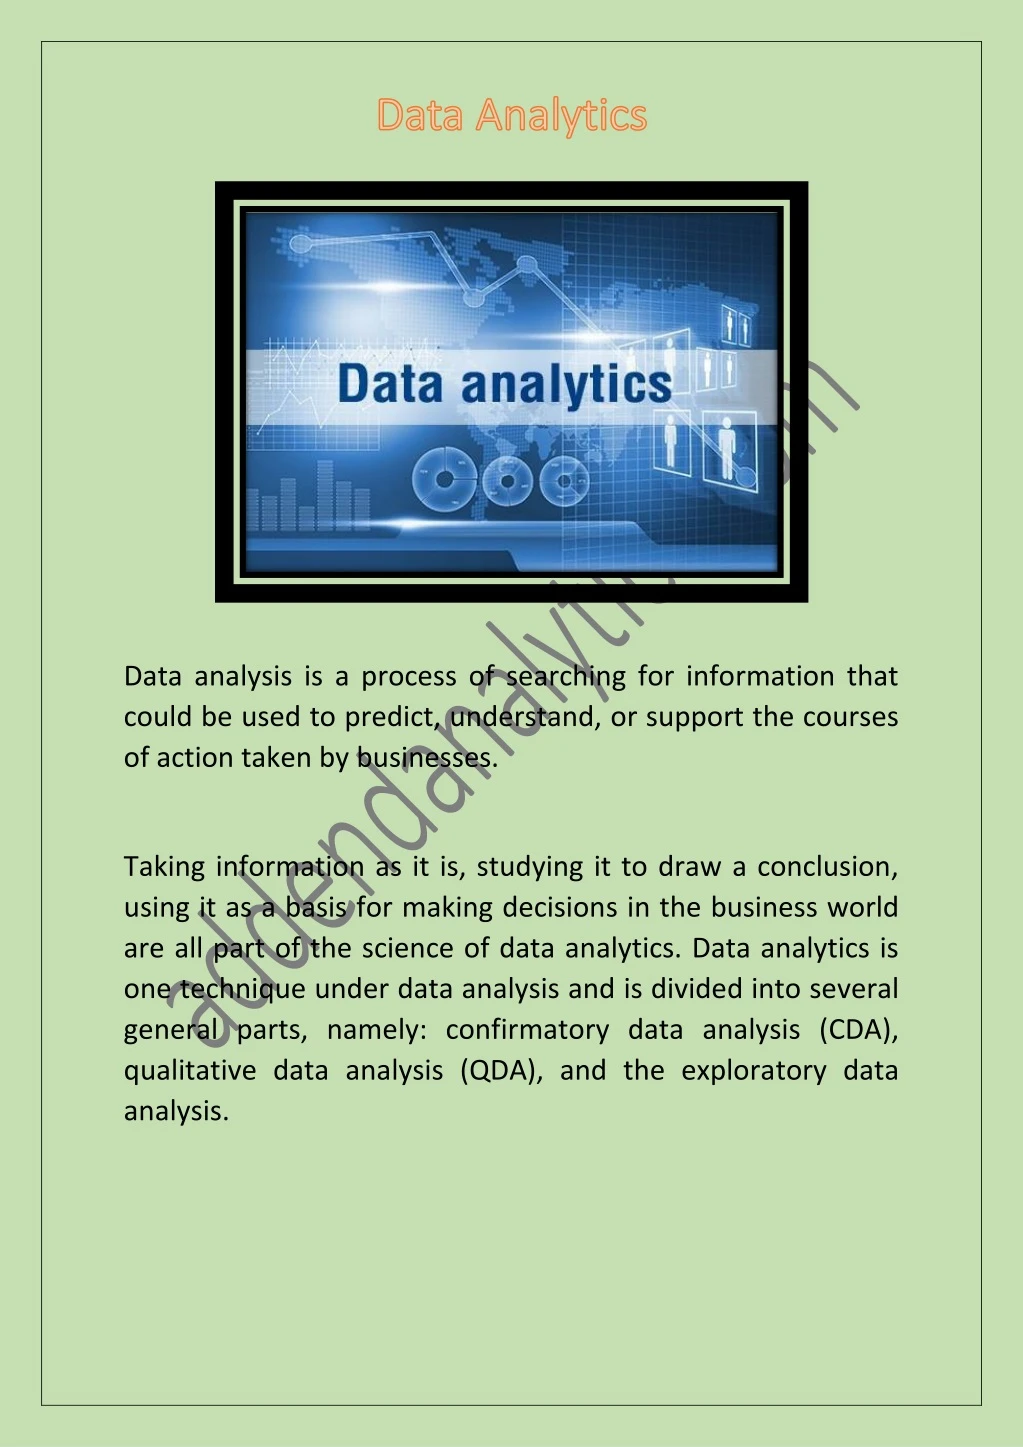 data analysis is a process of searching